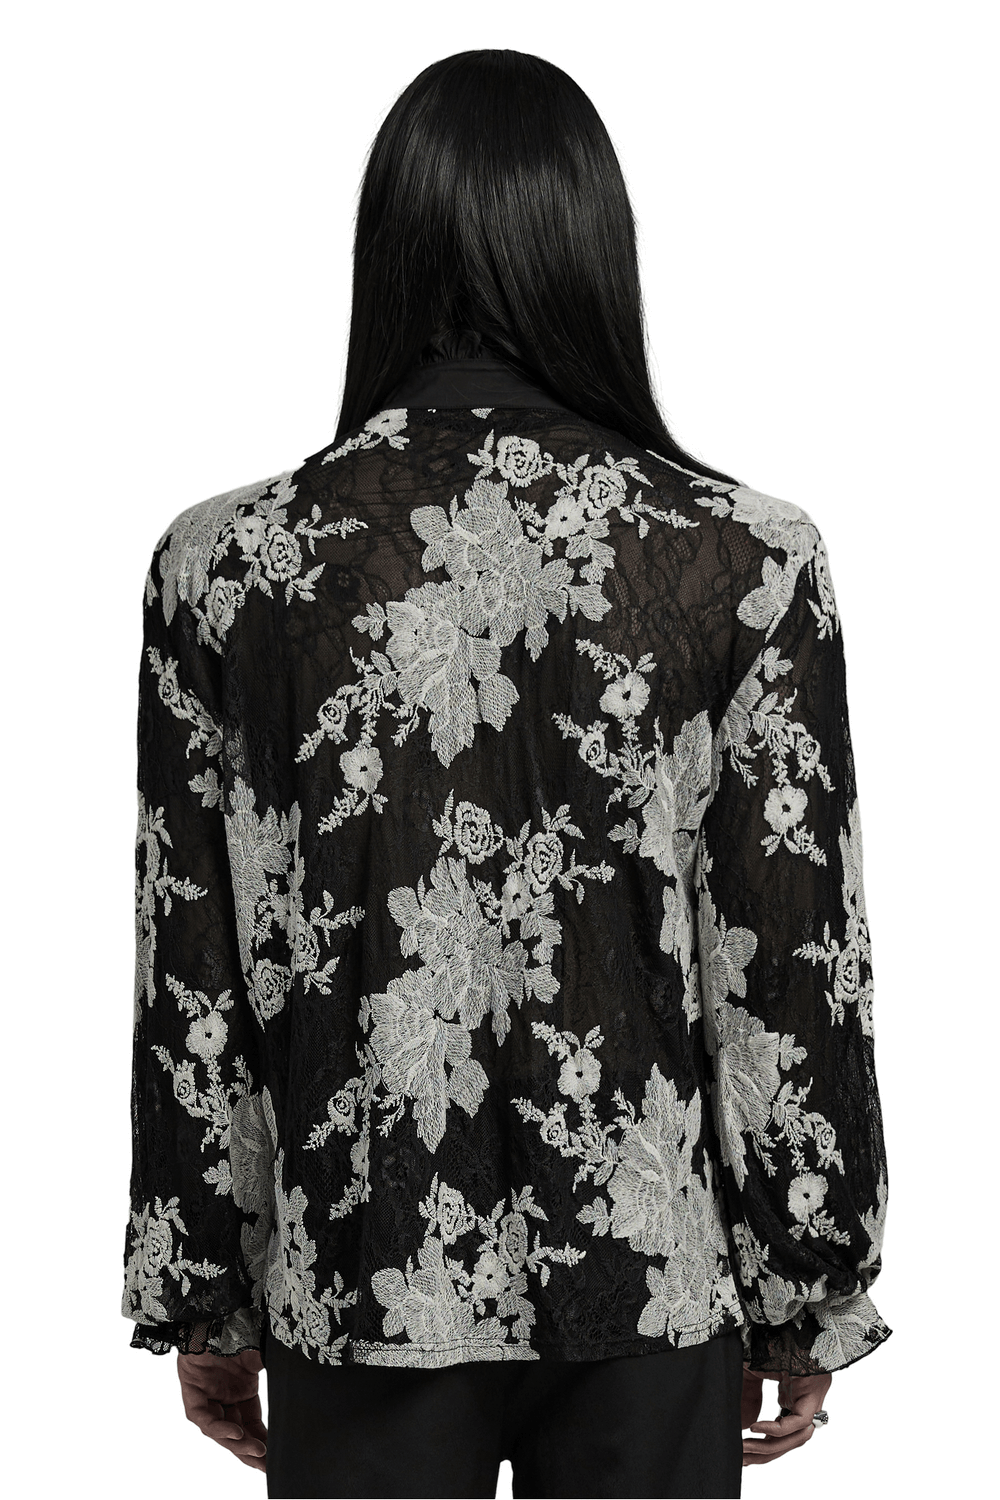 Men’s Gothic Floral Embroidered Lantern Sleeves Shirt